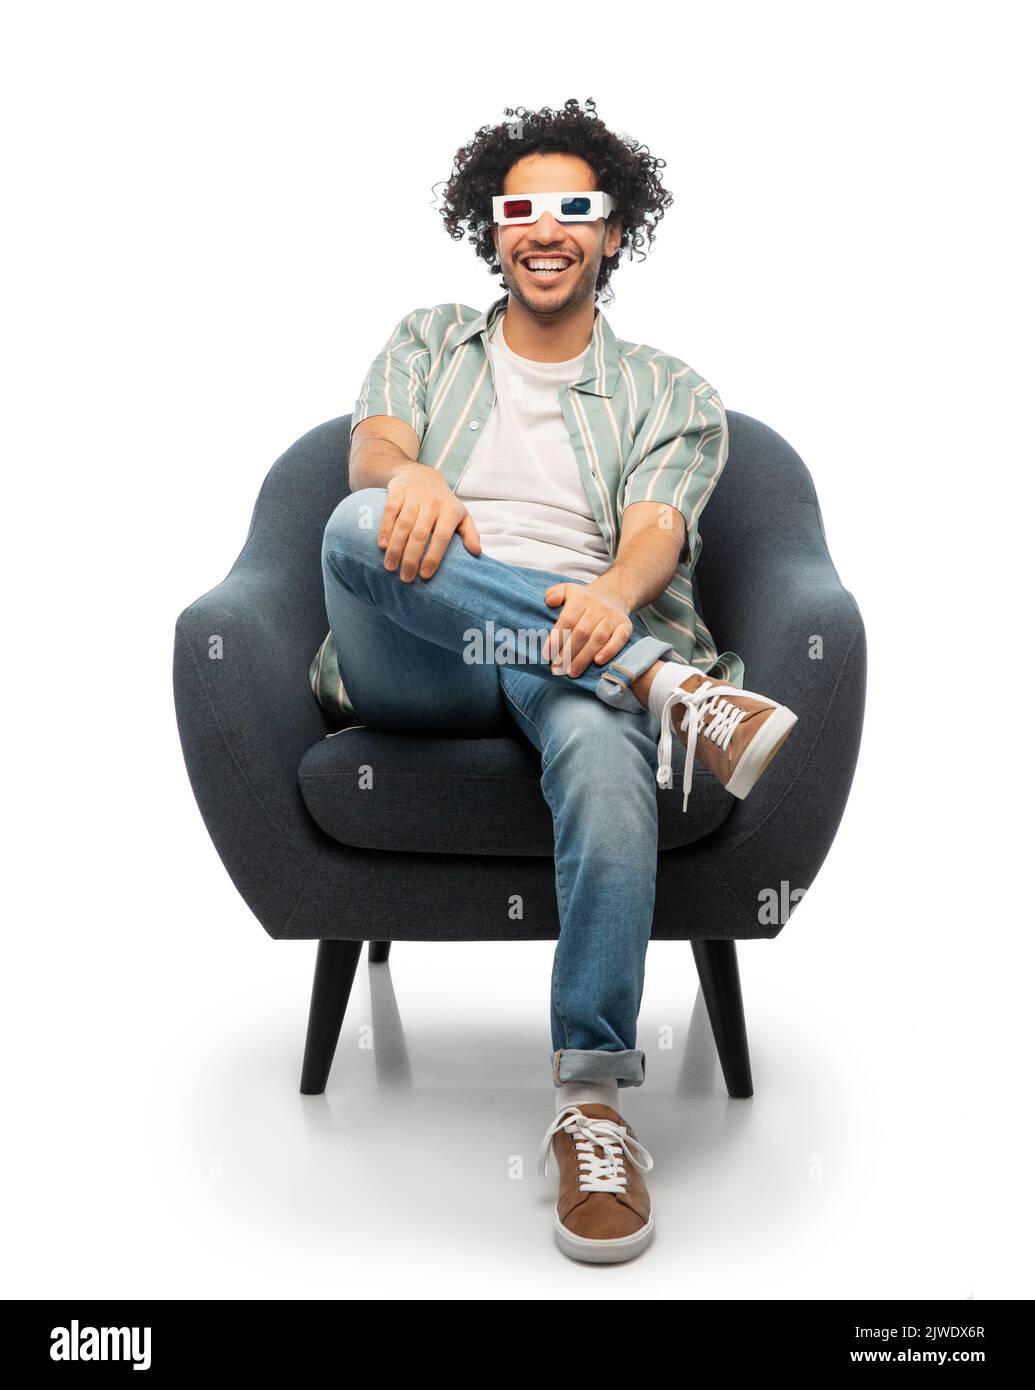 man in 3d glasses watching movie sitting in chair Stock Photo